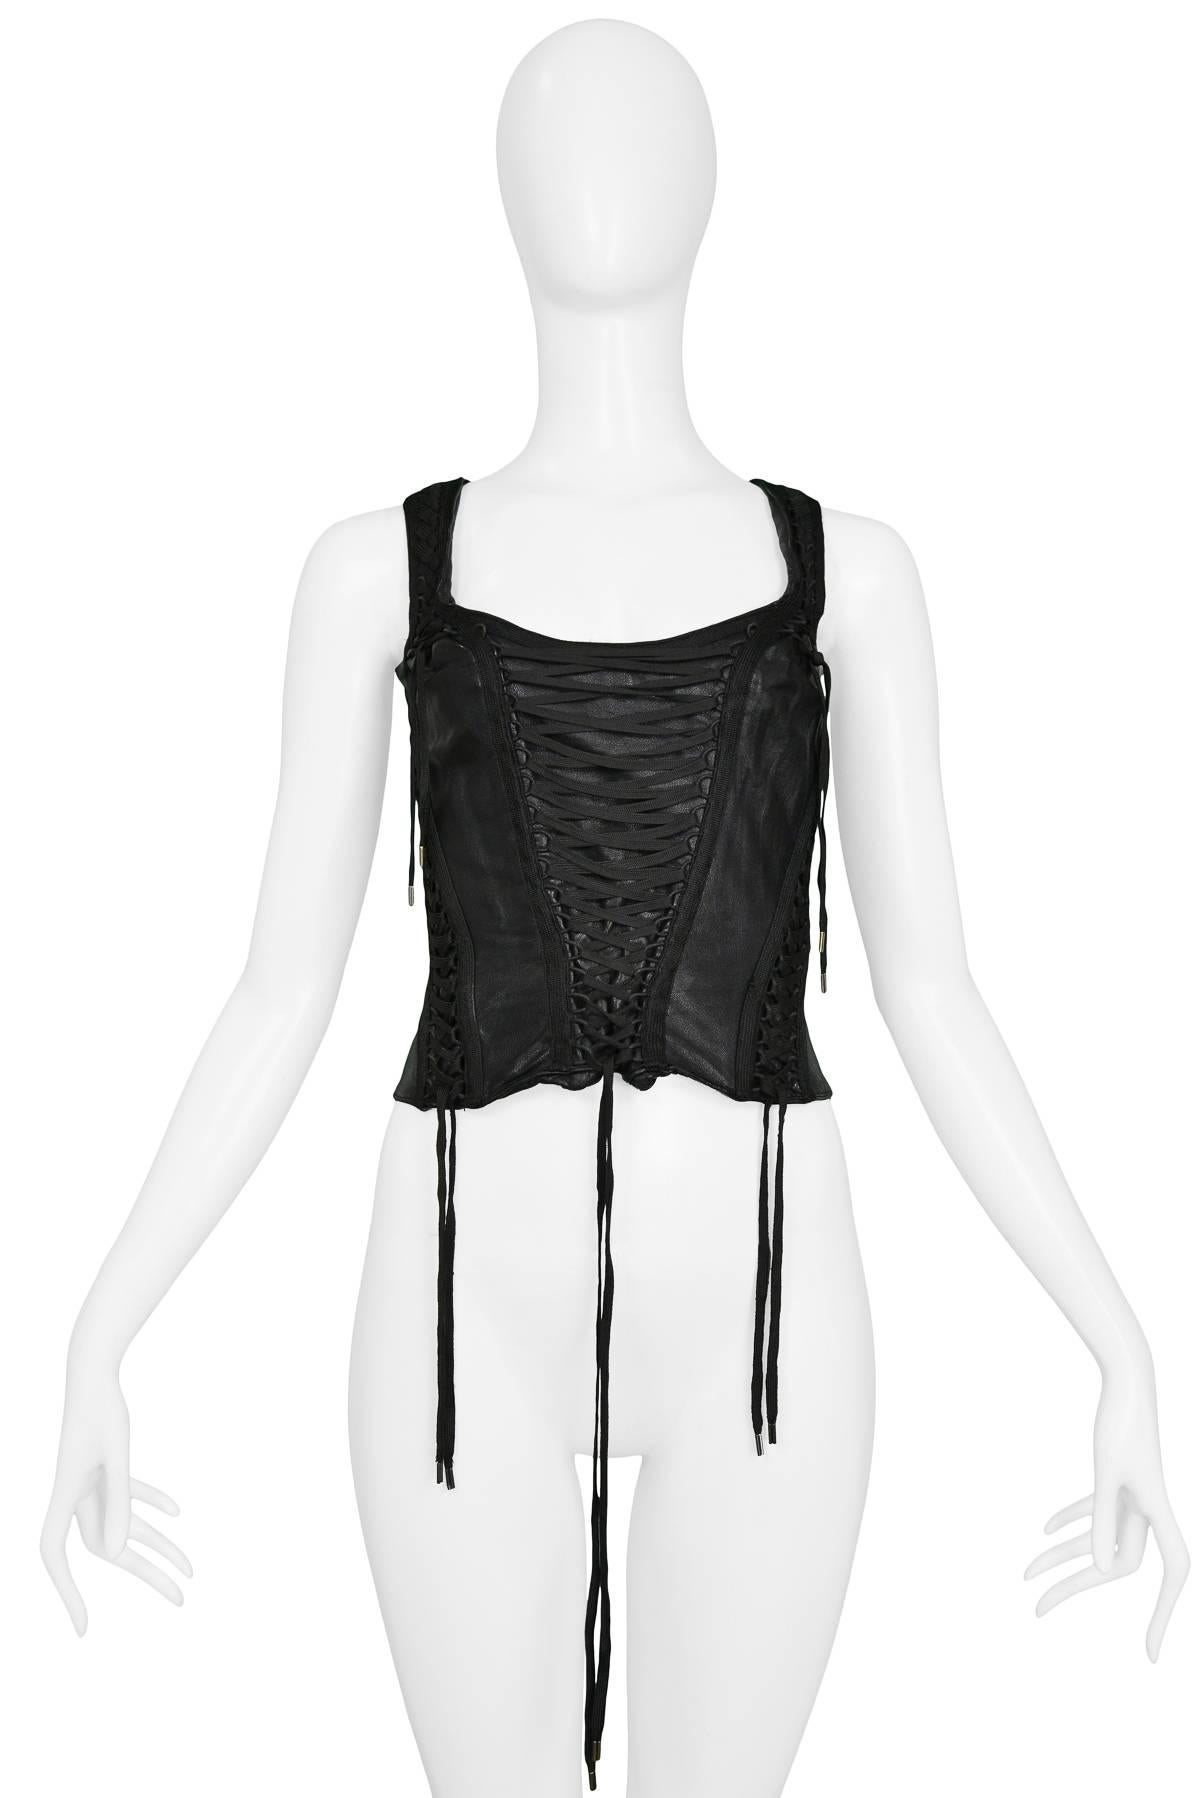 John Galliano for Christian Dior black leather top with corset laces at front, back & sides.

Size: FR 40